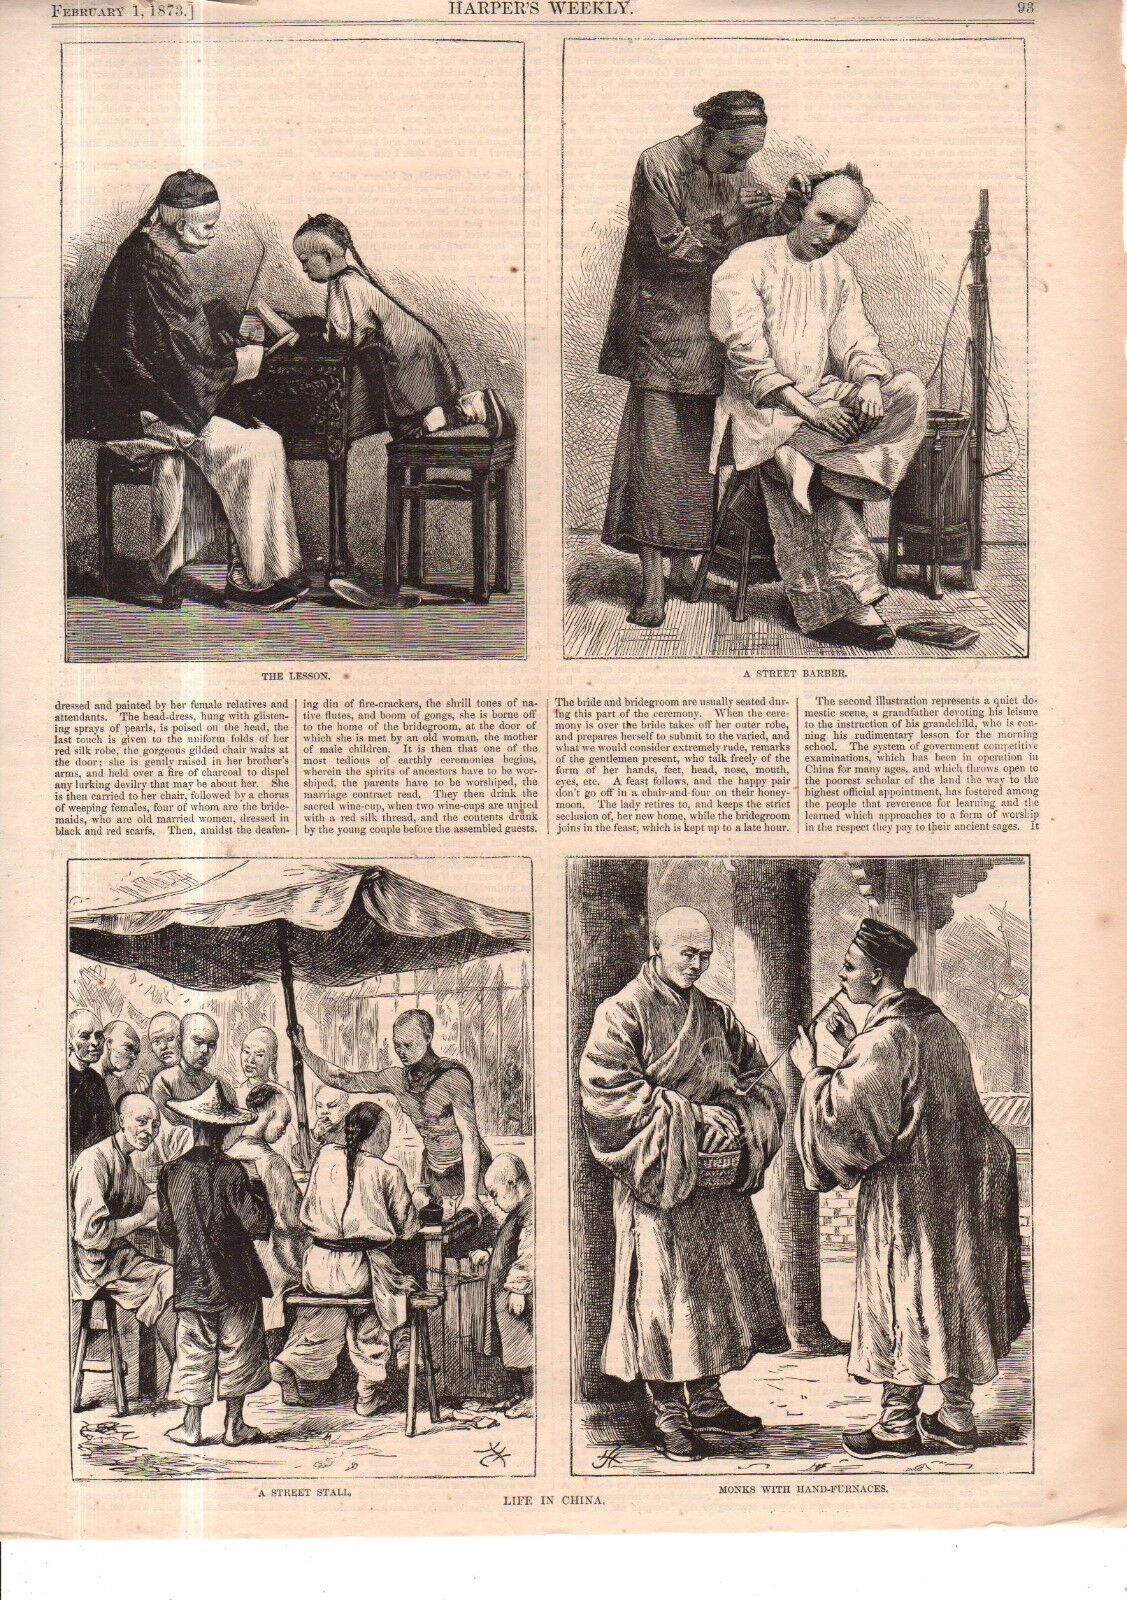 1873 Harper's Weekly - Life in China - Barber, school lesson, street stall, Monk